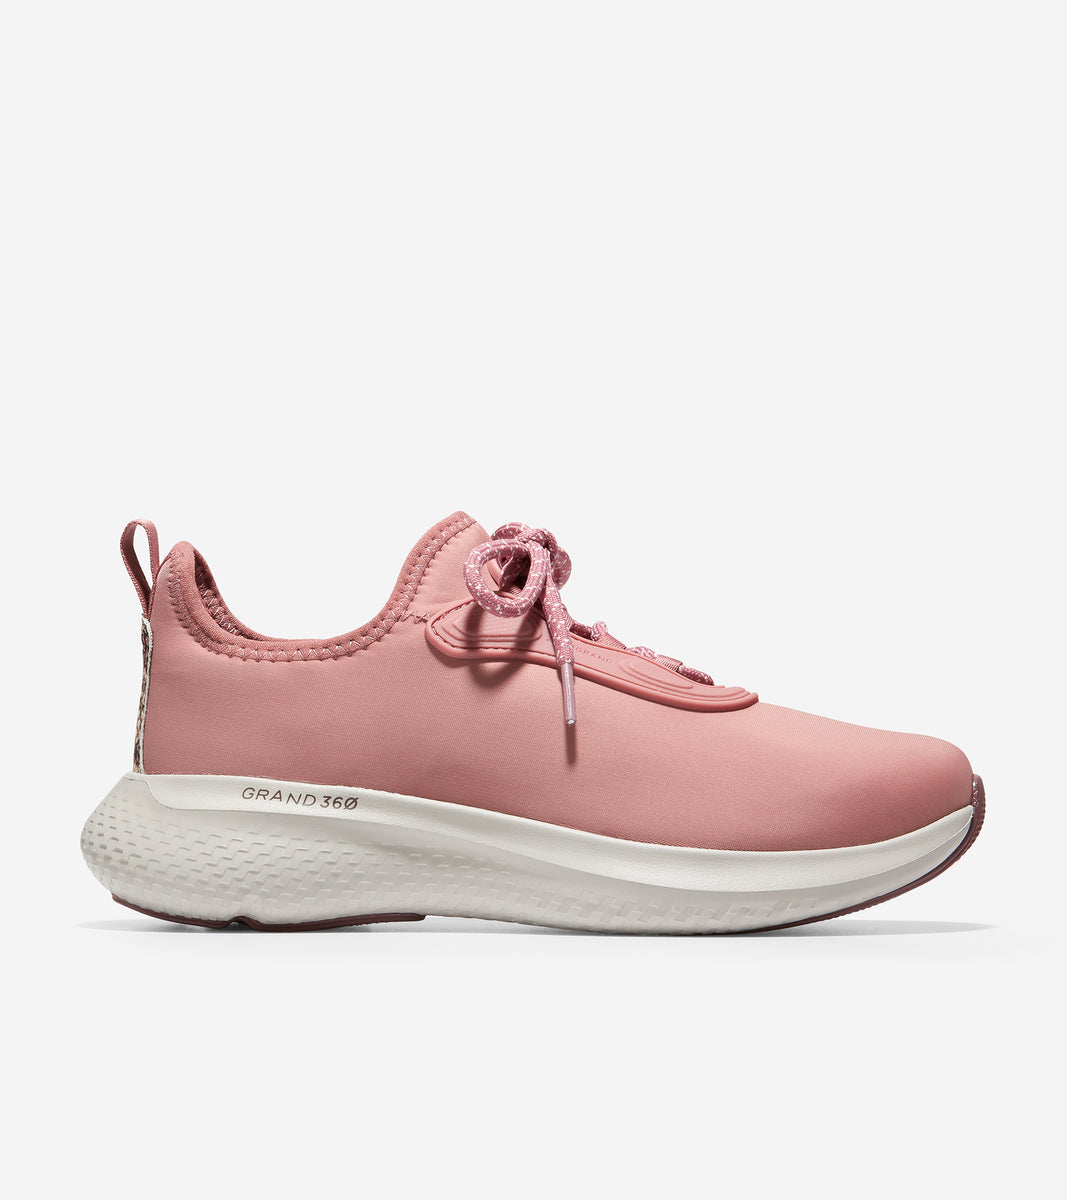 ZERØGRAND Changepace Lace Up Sneaker-W24084-Ch New Rose / Dove / Ivory / Black